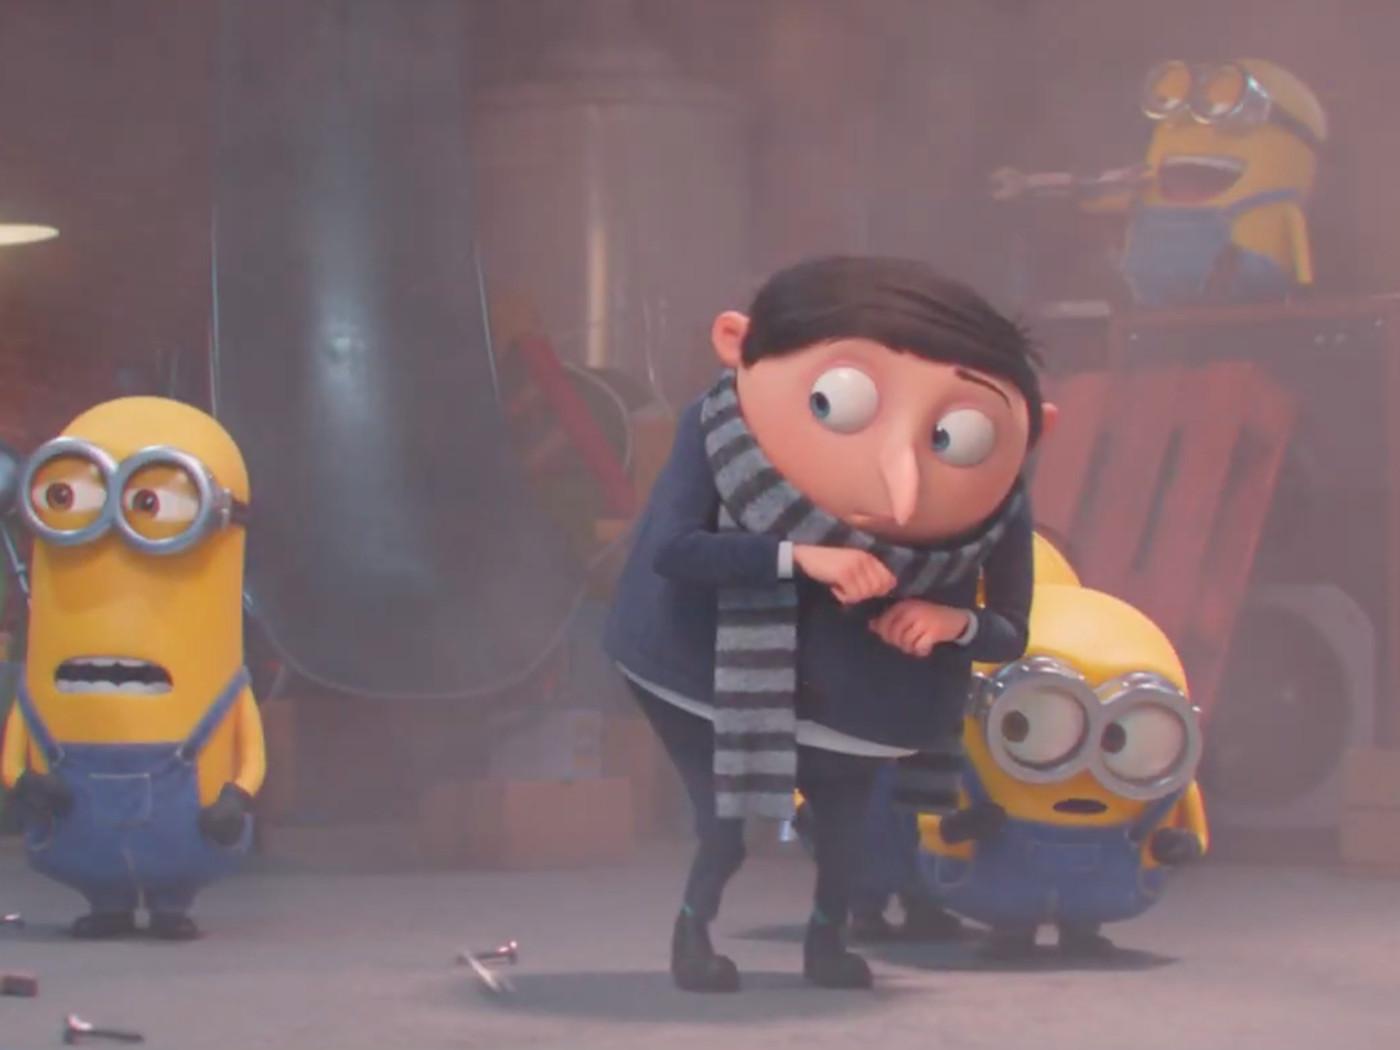 Minions 2 trailer pits Baby Gru against Baby Nut at the Super Bowl